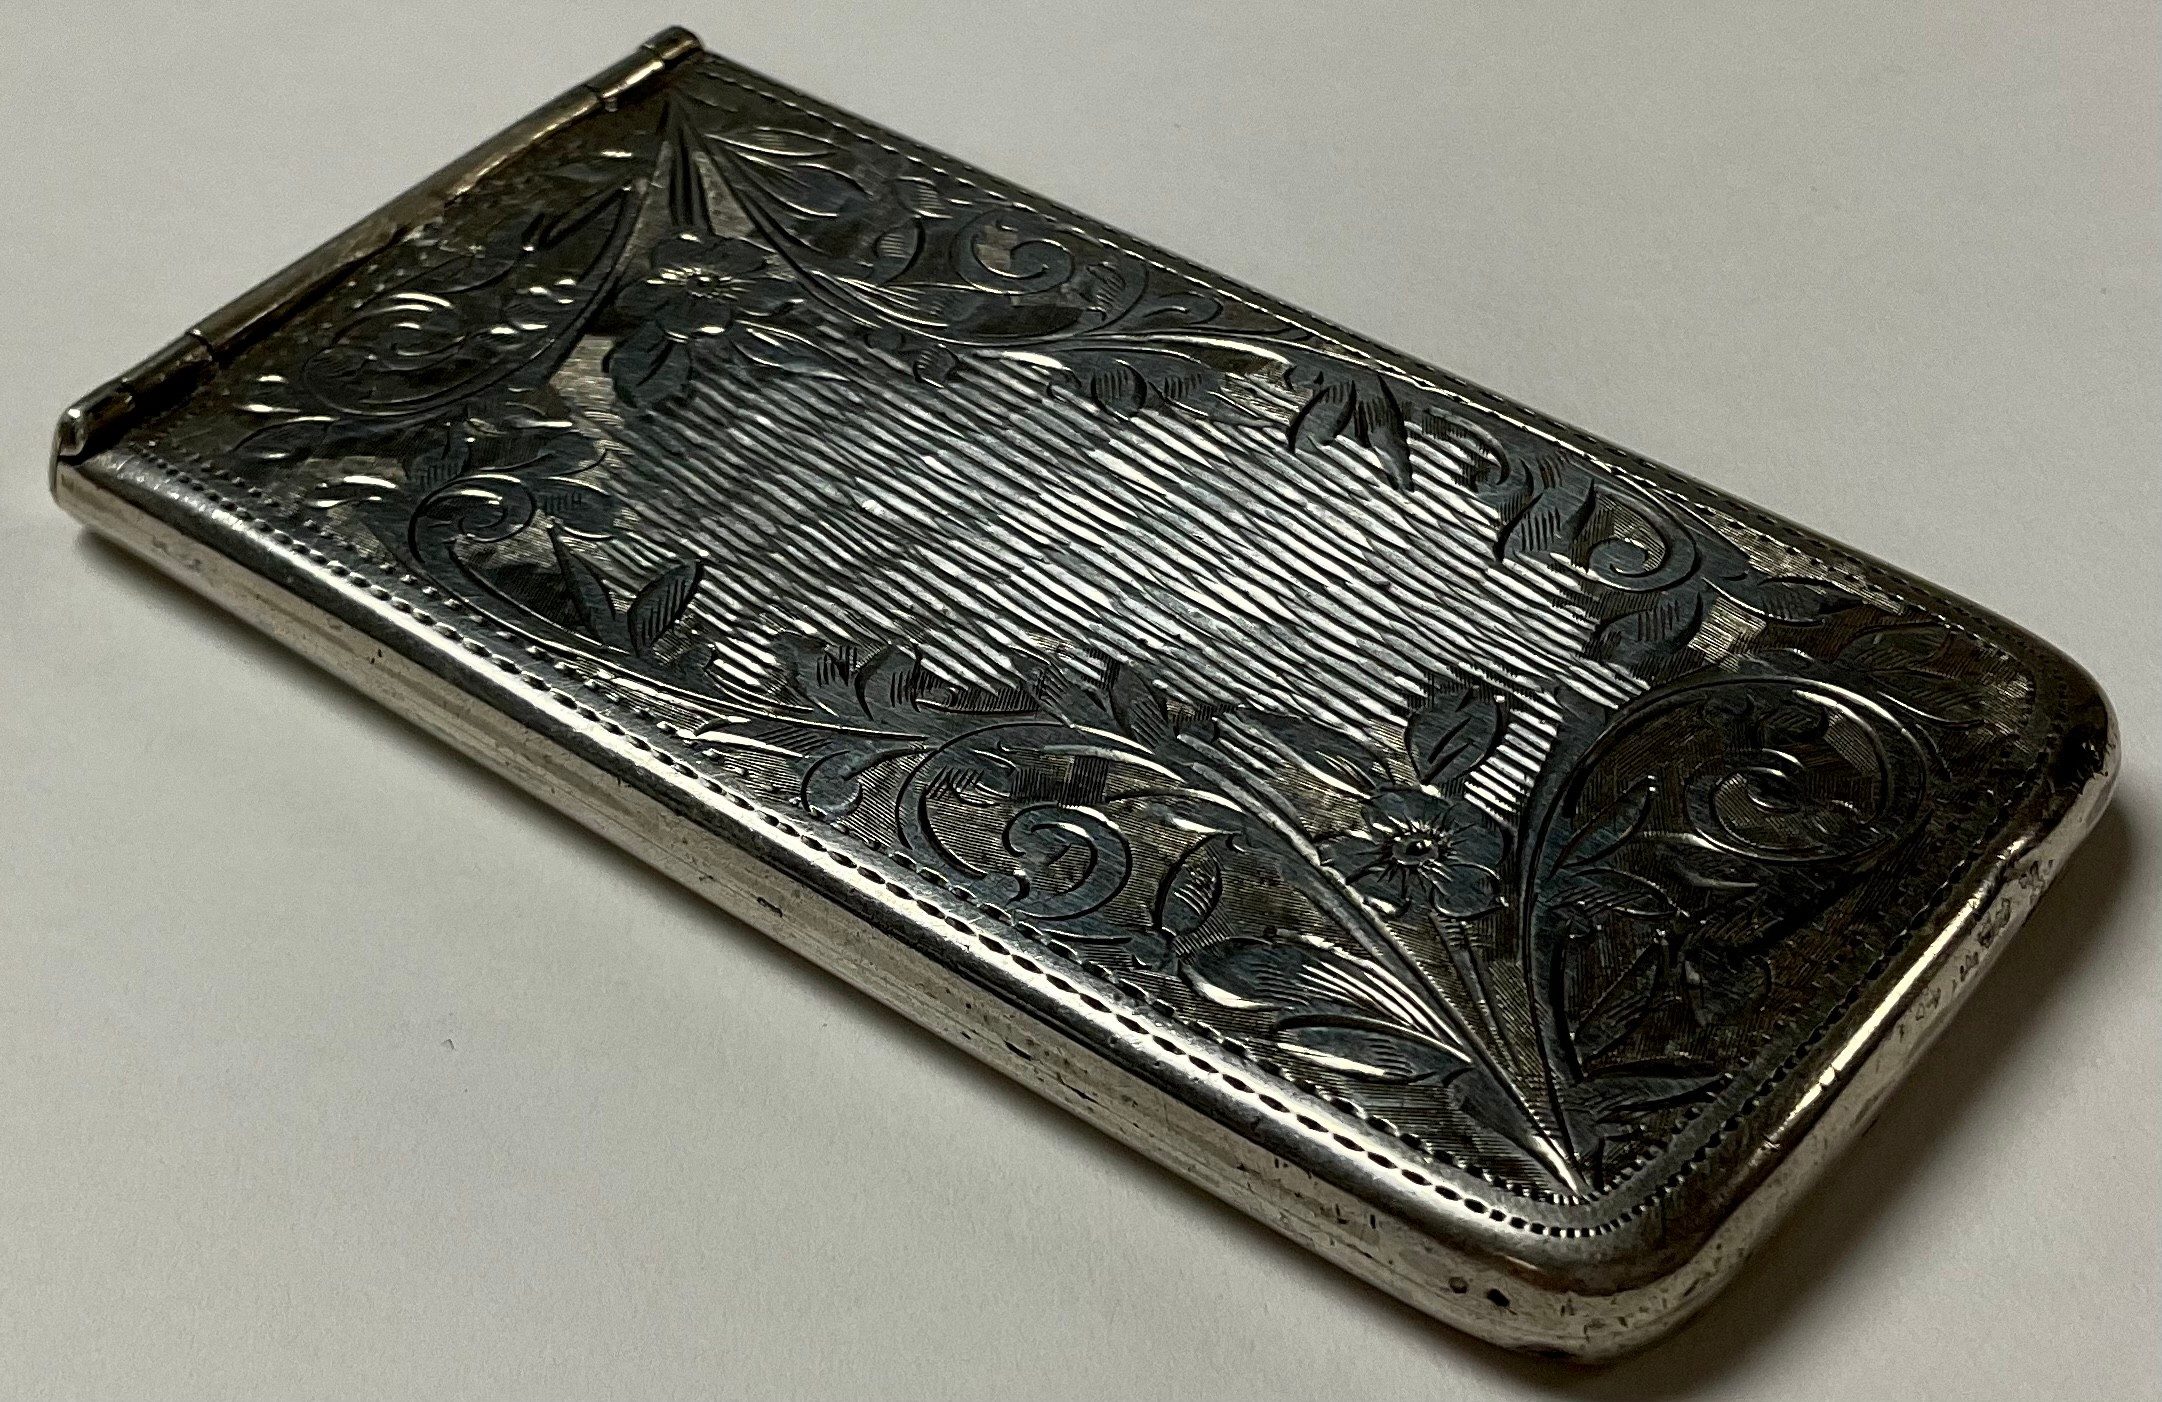 An Edward VII silver visiting card case, chased and engraved with foliate scrolls, patented silver - Image 2 of 2